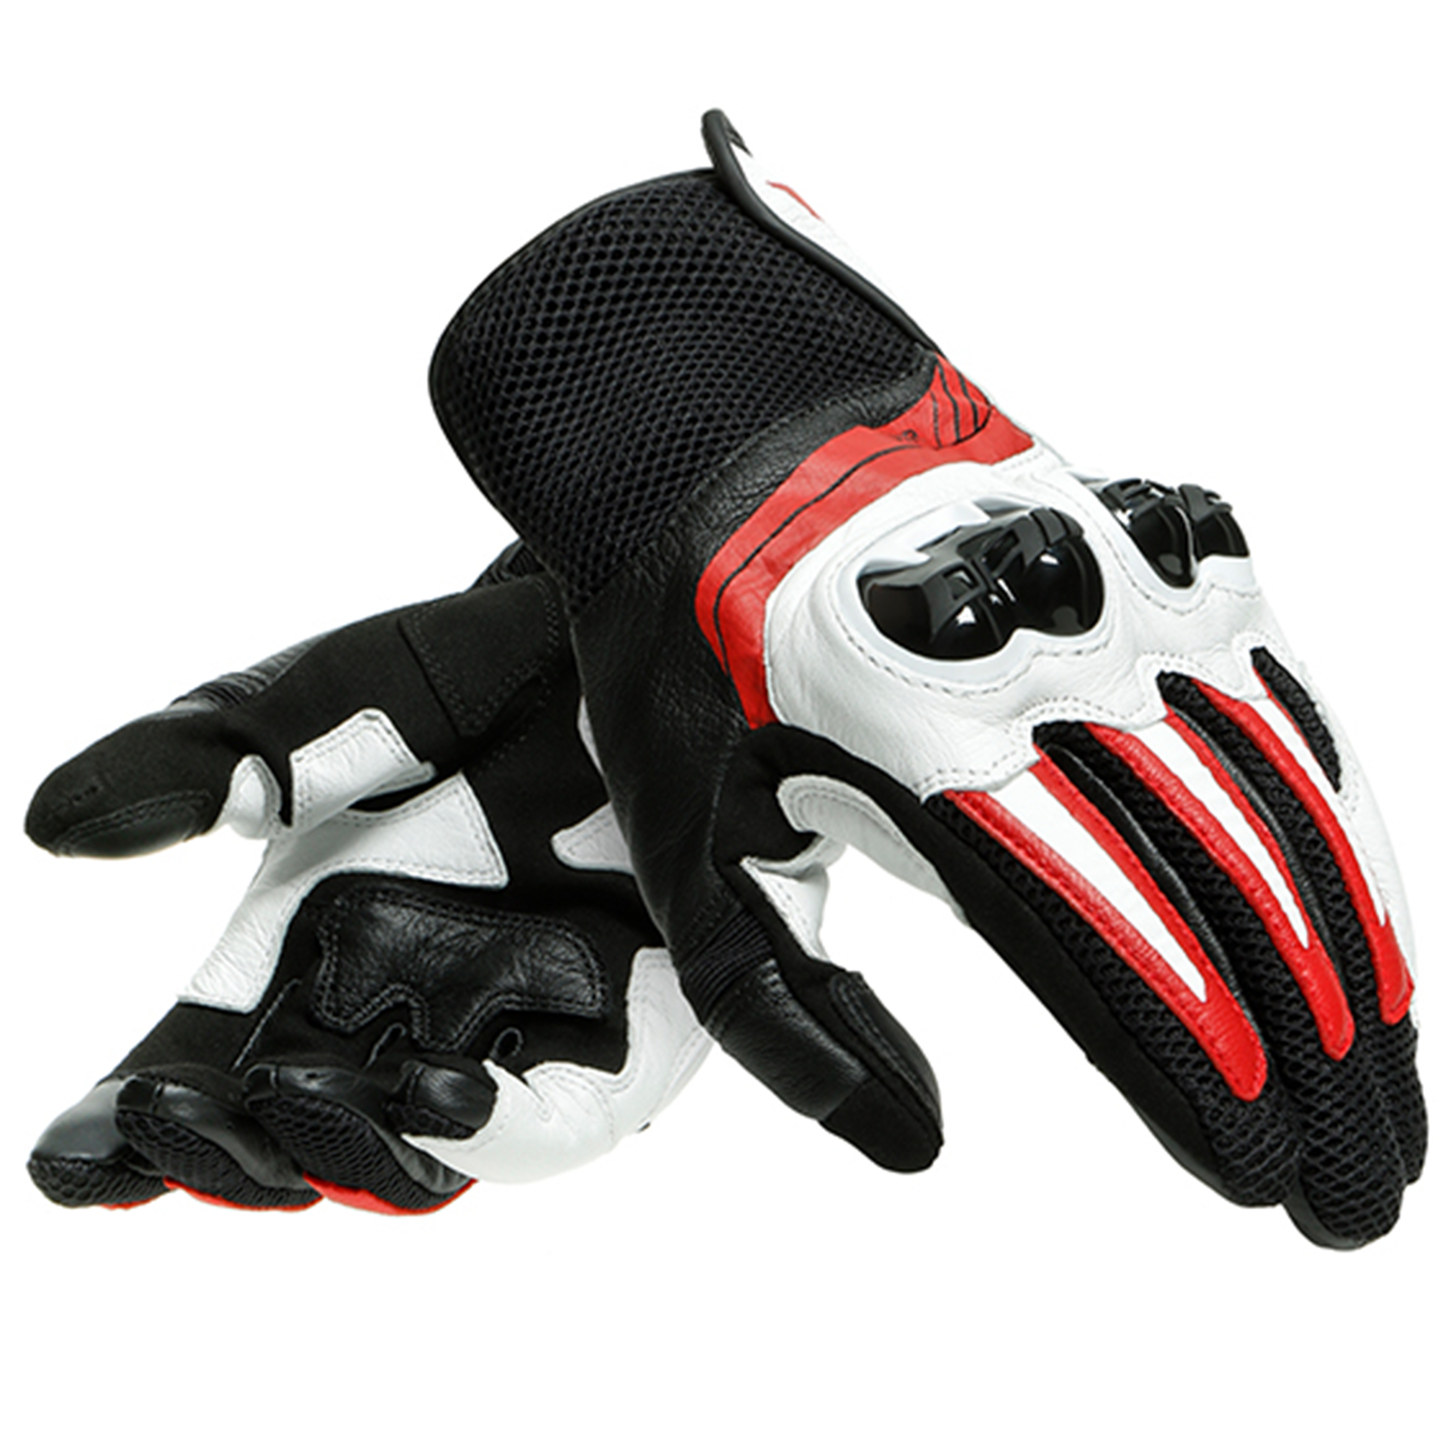 Dainese Mig 3 Leather Motorcycle Gloves - Black/White/Lava-Red